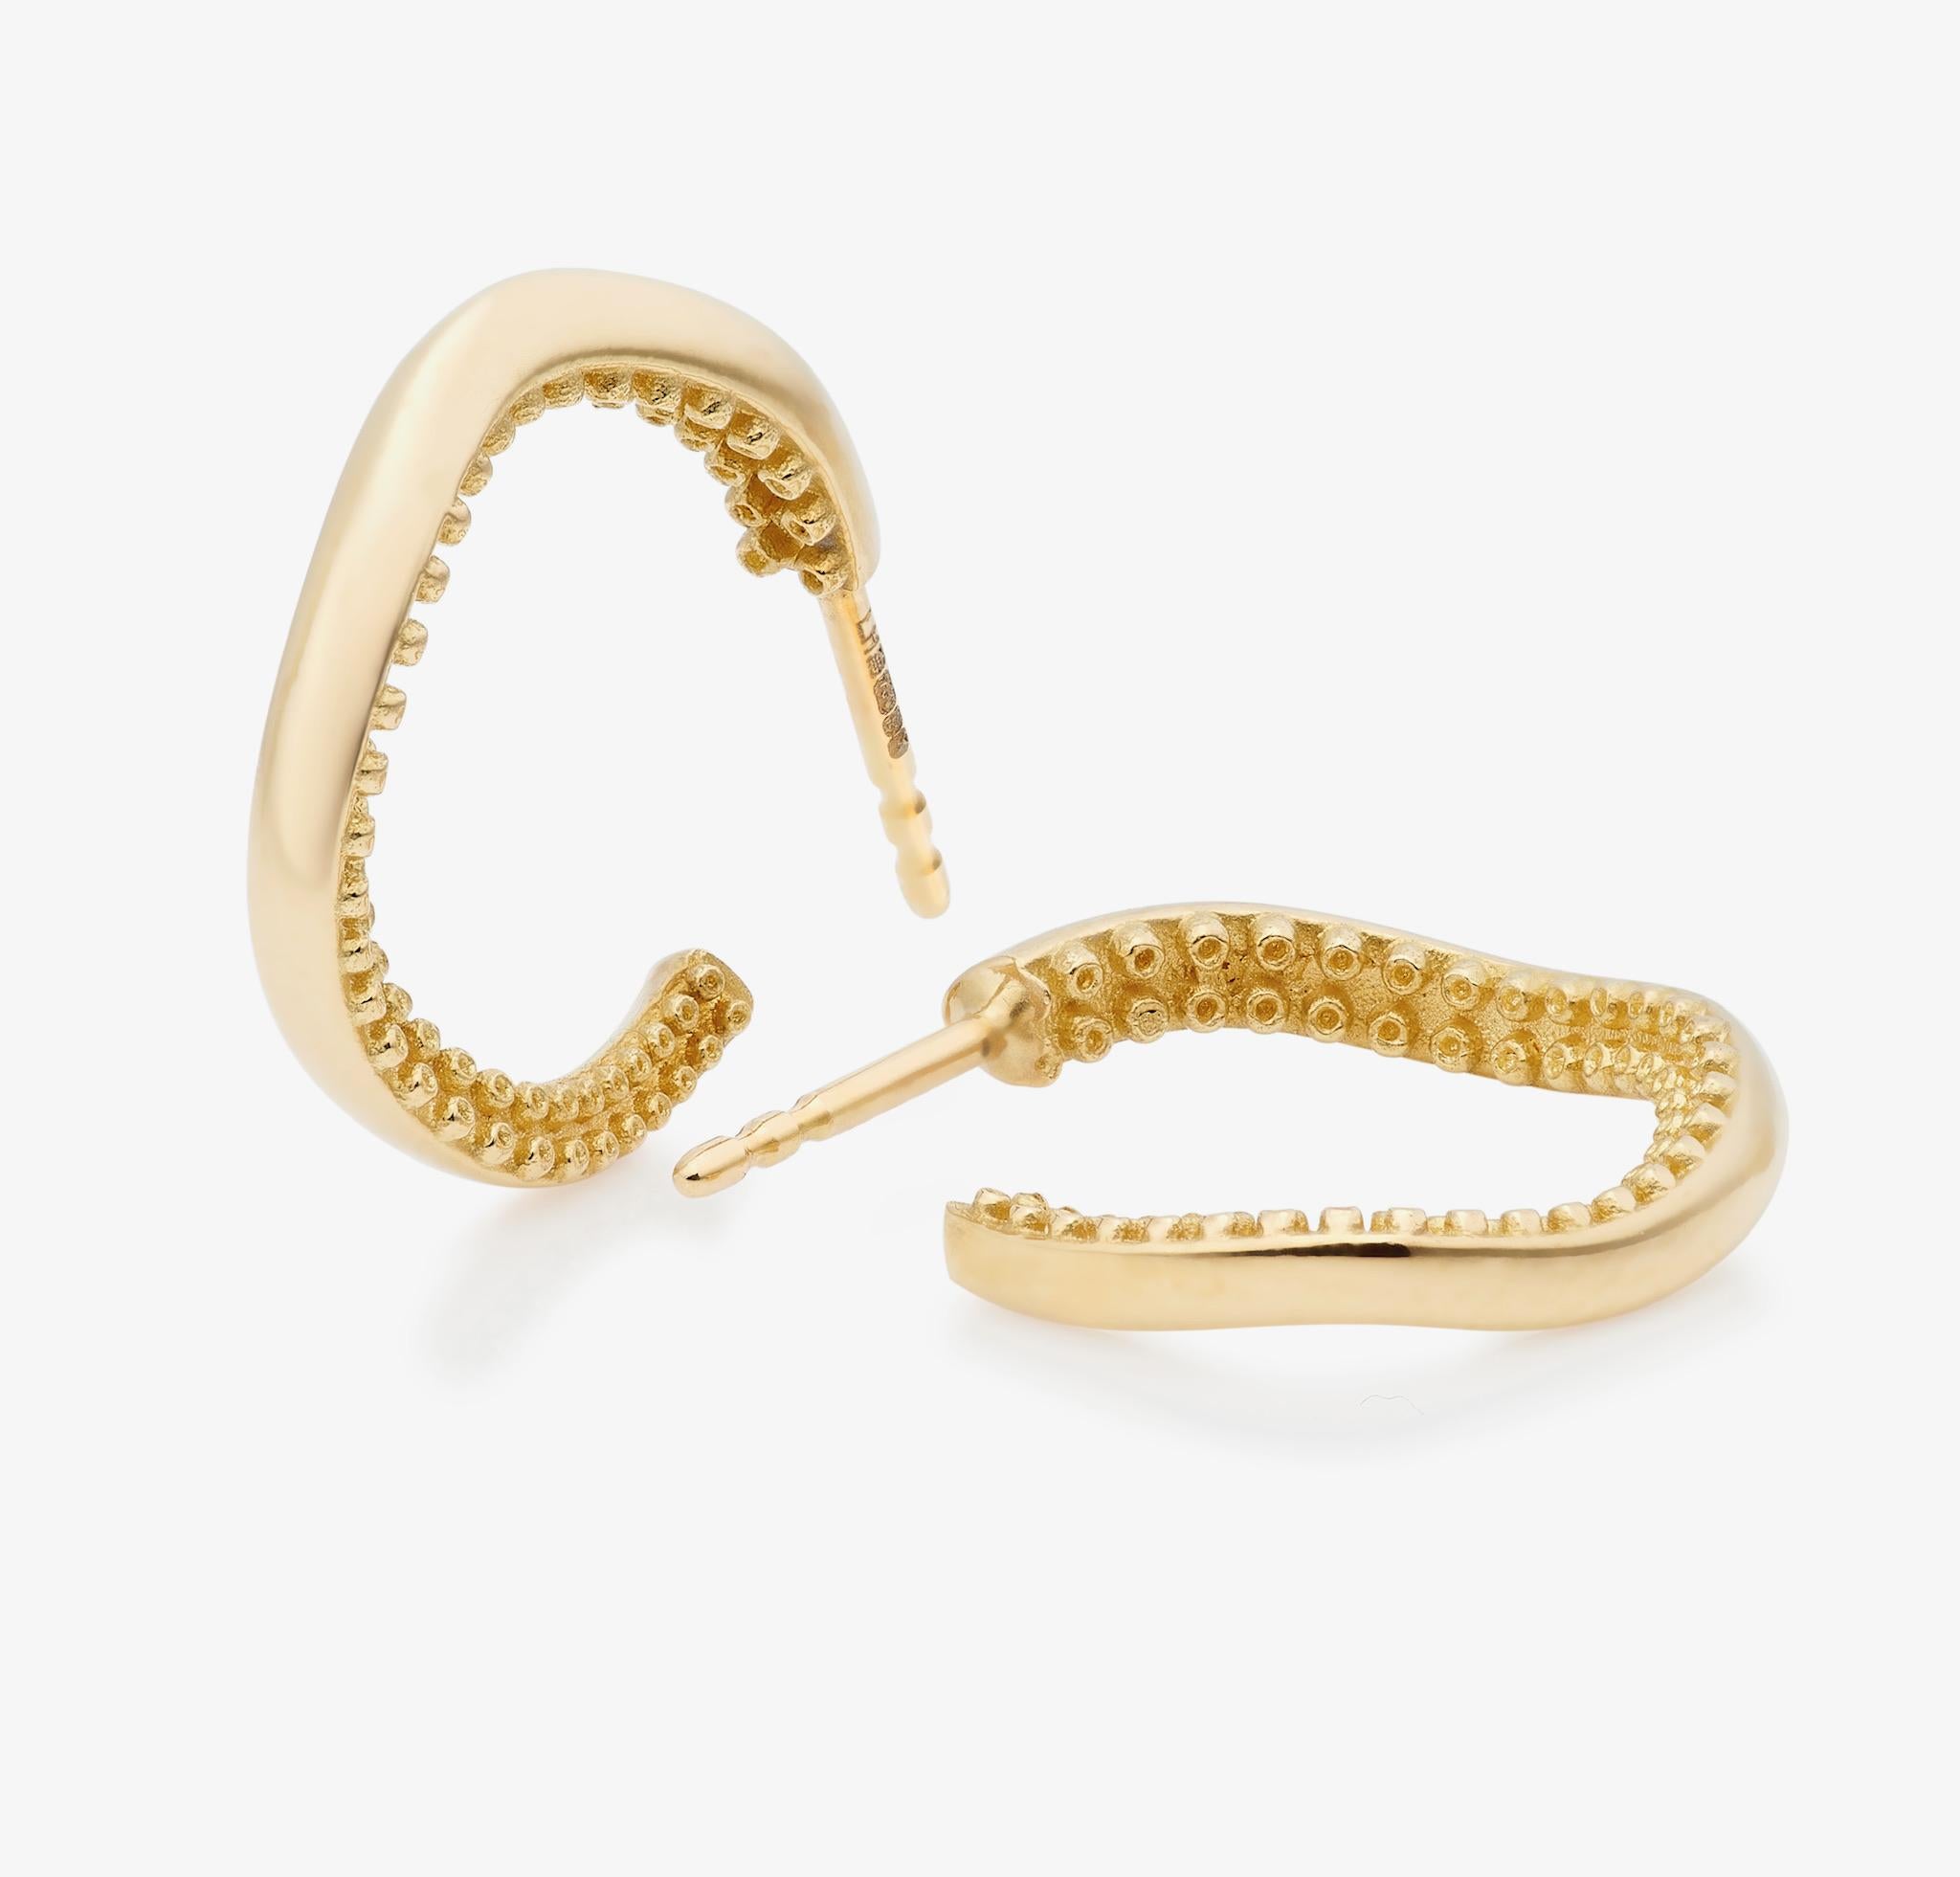 Octopus inspired hoop earrings in 18 Karat gold from Lilly Hastedt's 